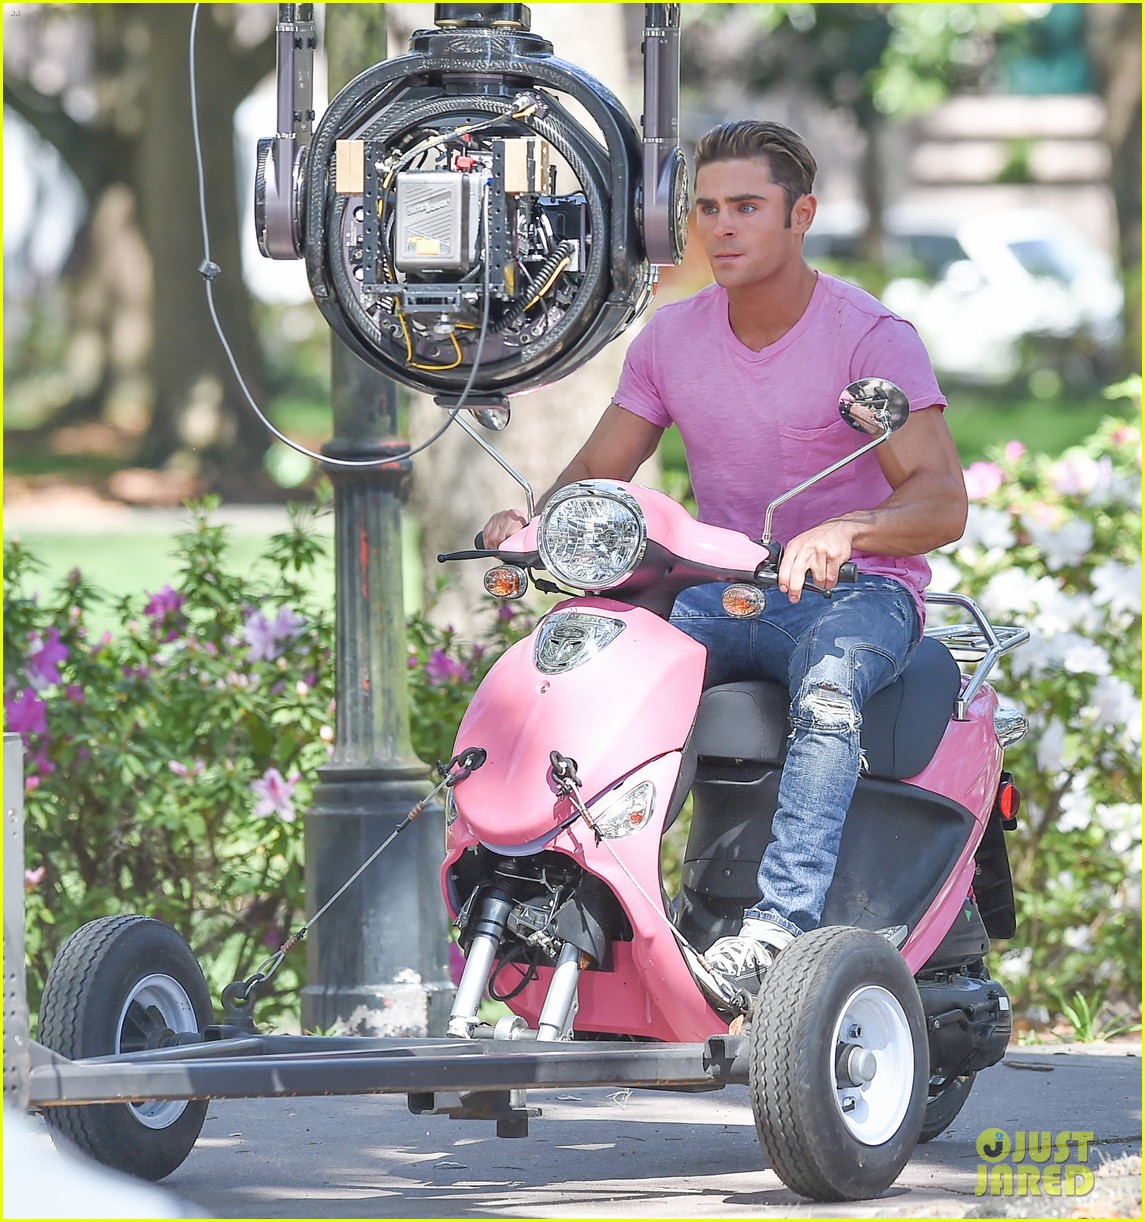 zac efron the rock film baywatch on a scooter 40